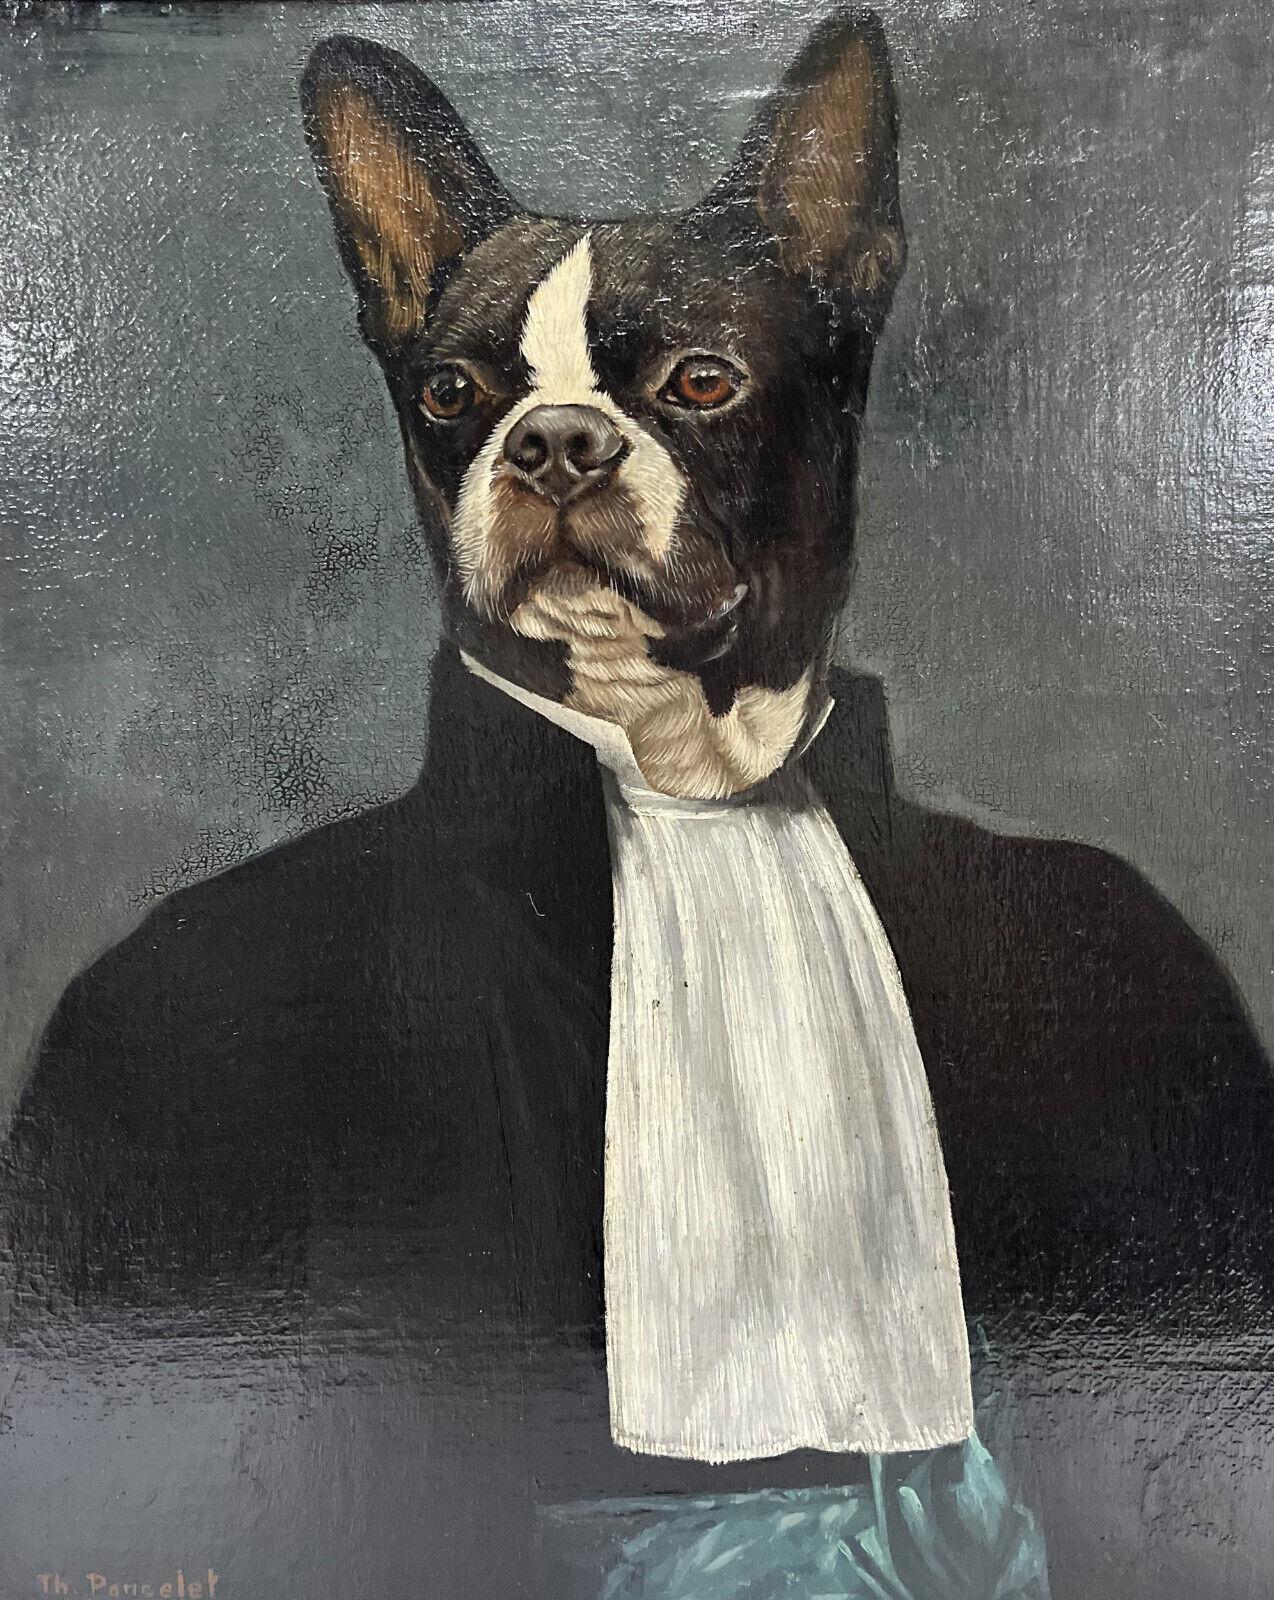 Thierry Poncelet Anthropomorphic Portrait of a Boston Terrier Dog Oil on Canvas

 Thierry Poncelet (Belgian, b. 1946) anthropomorphic portrait of a Boston Terrier dog. Originally mid-19th century or earlier oil on canvas depicting an English